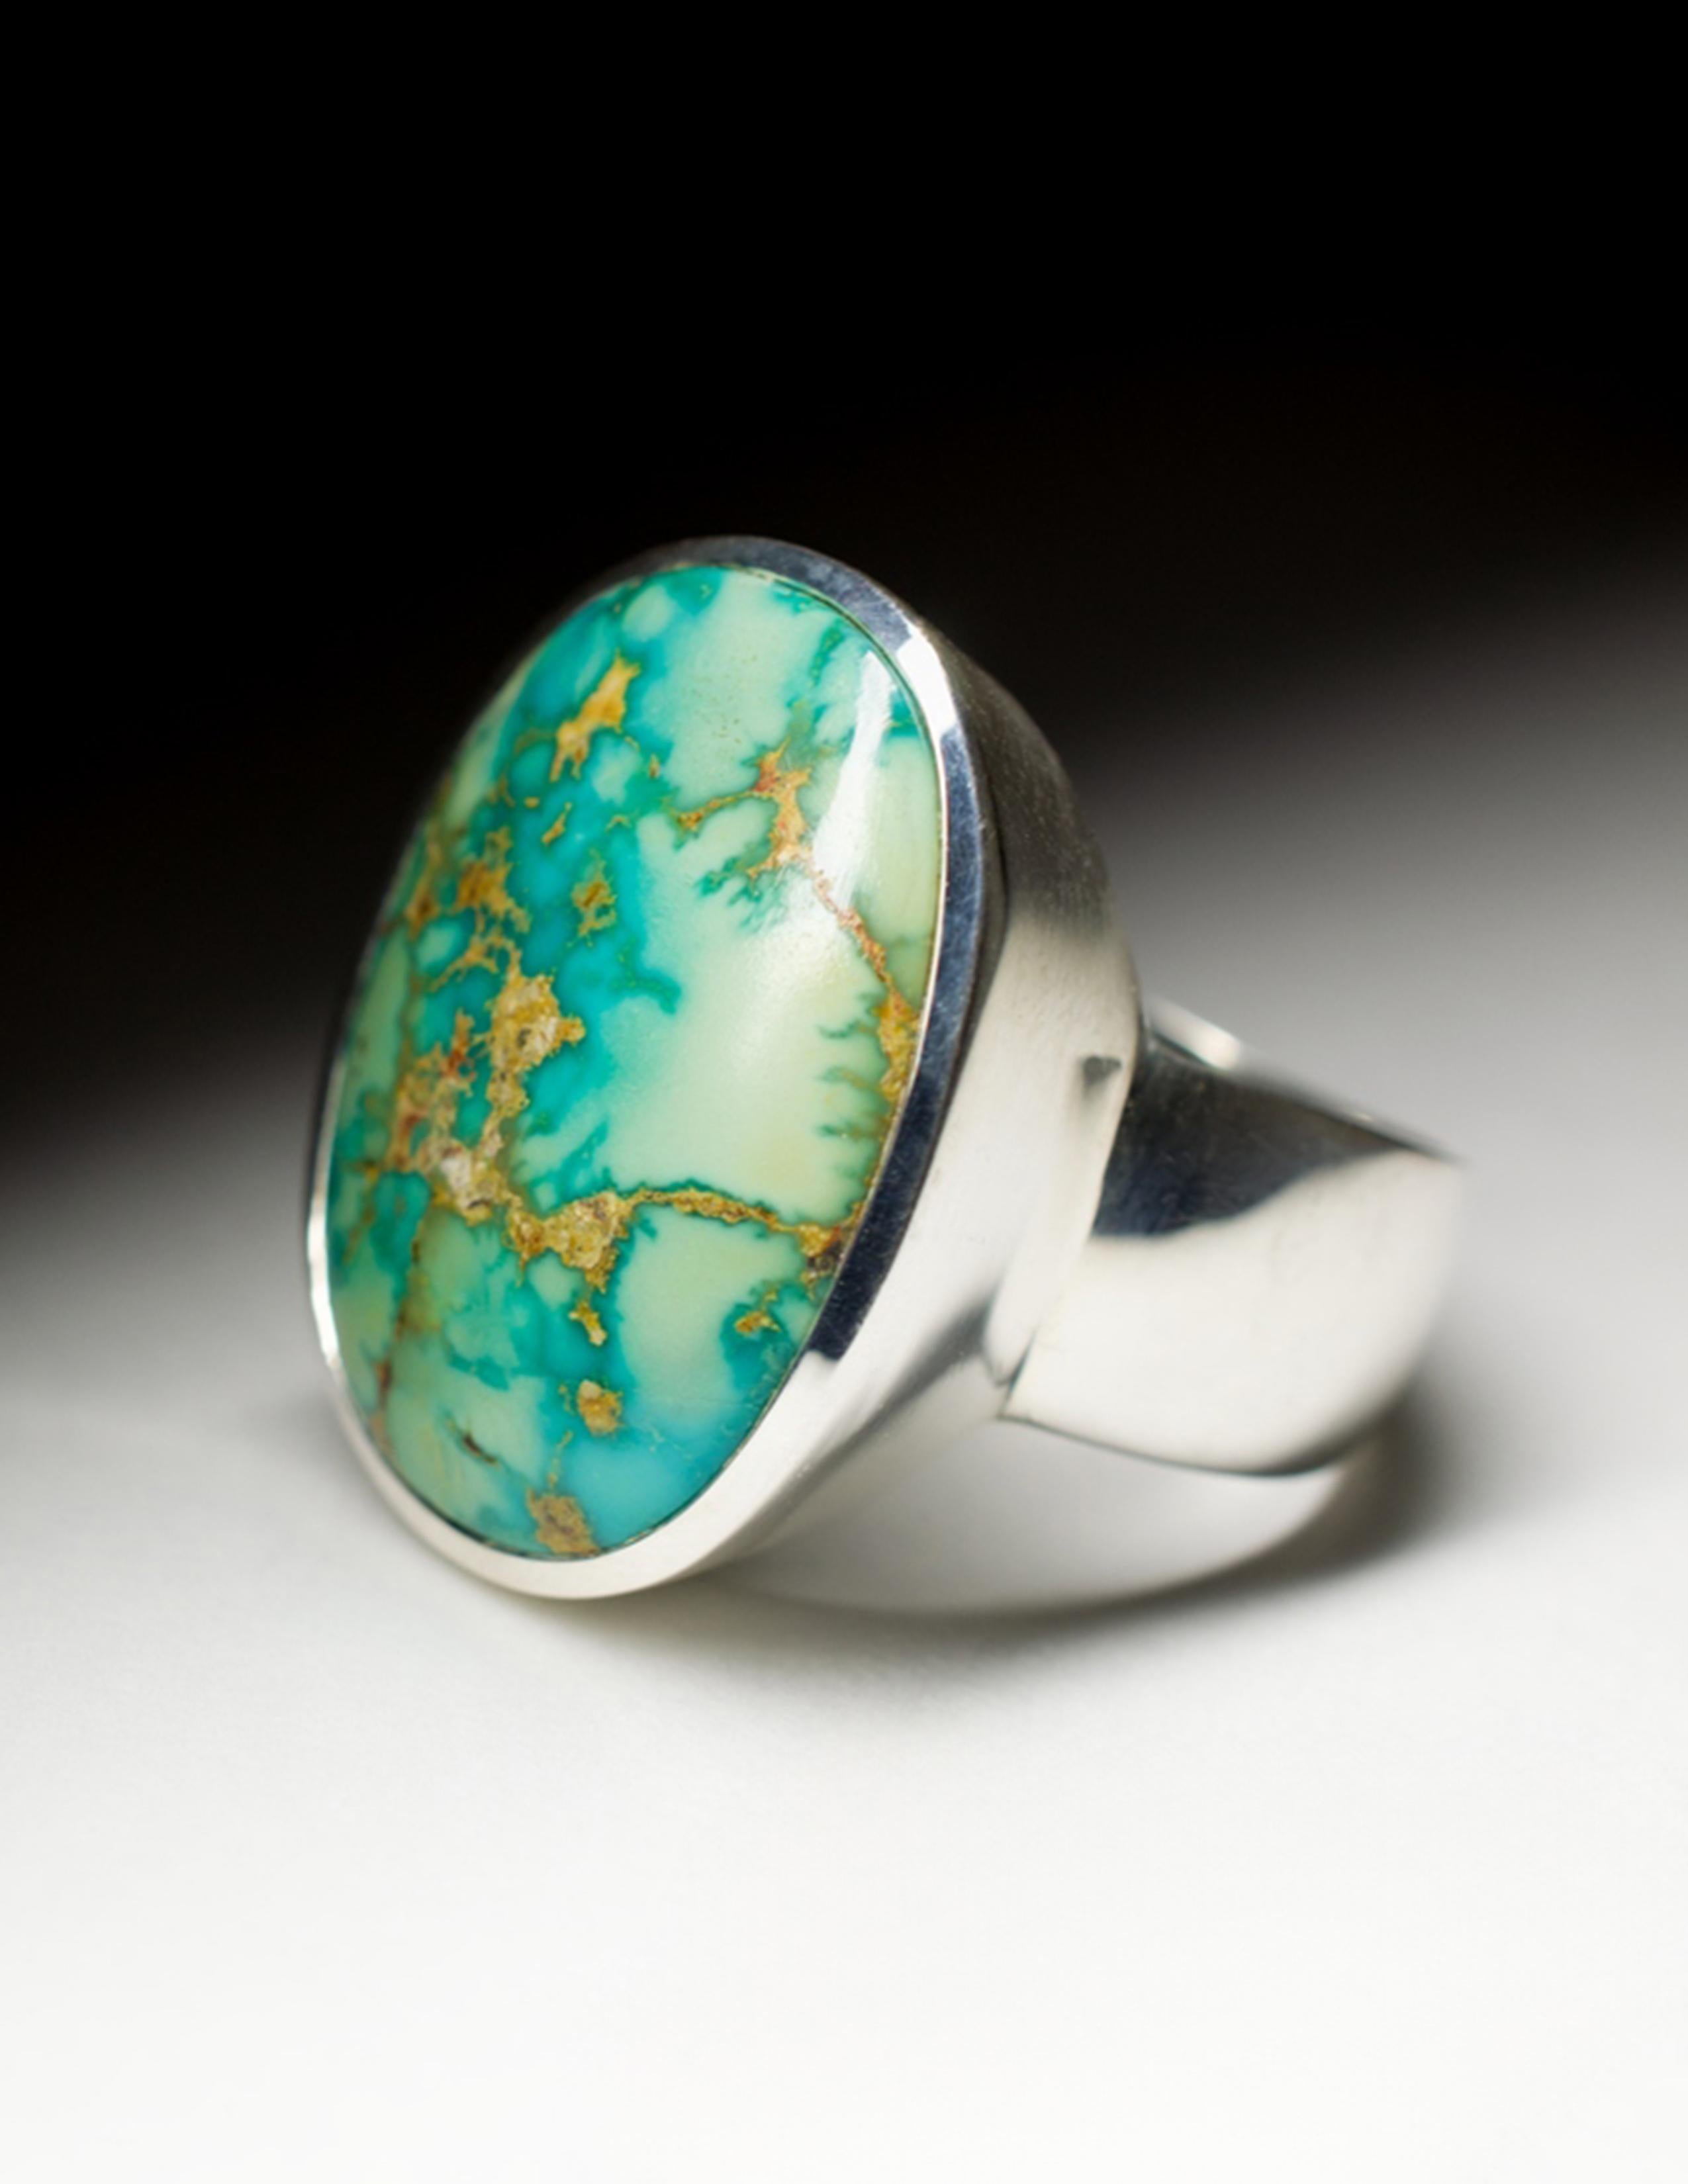 Large unisex silver ring with natural Turquoise
turquoise origin - Nishapur
stone measurements - 0.39 х 0.71 х 0.98 in / 10 х 18 х 25 mm
turquoise weight - 34 carats
ring weight - 19.18 grams
ring size - 9.75 US


We ship our jewelry worldwide – for